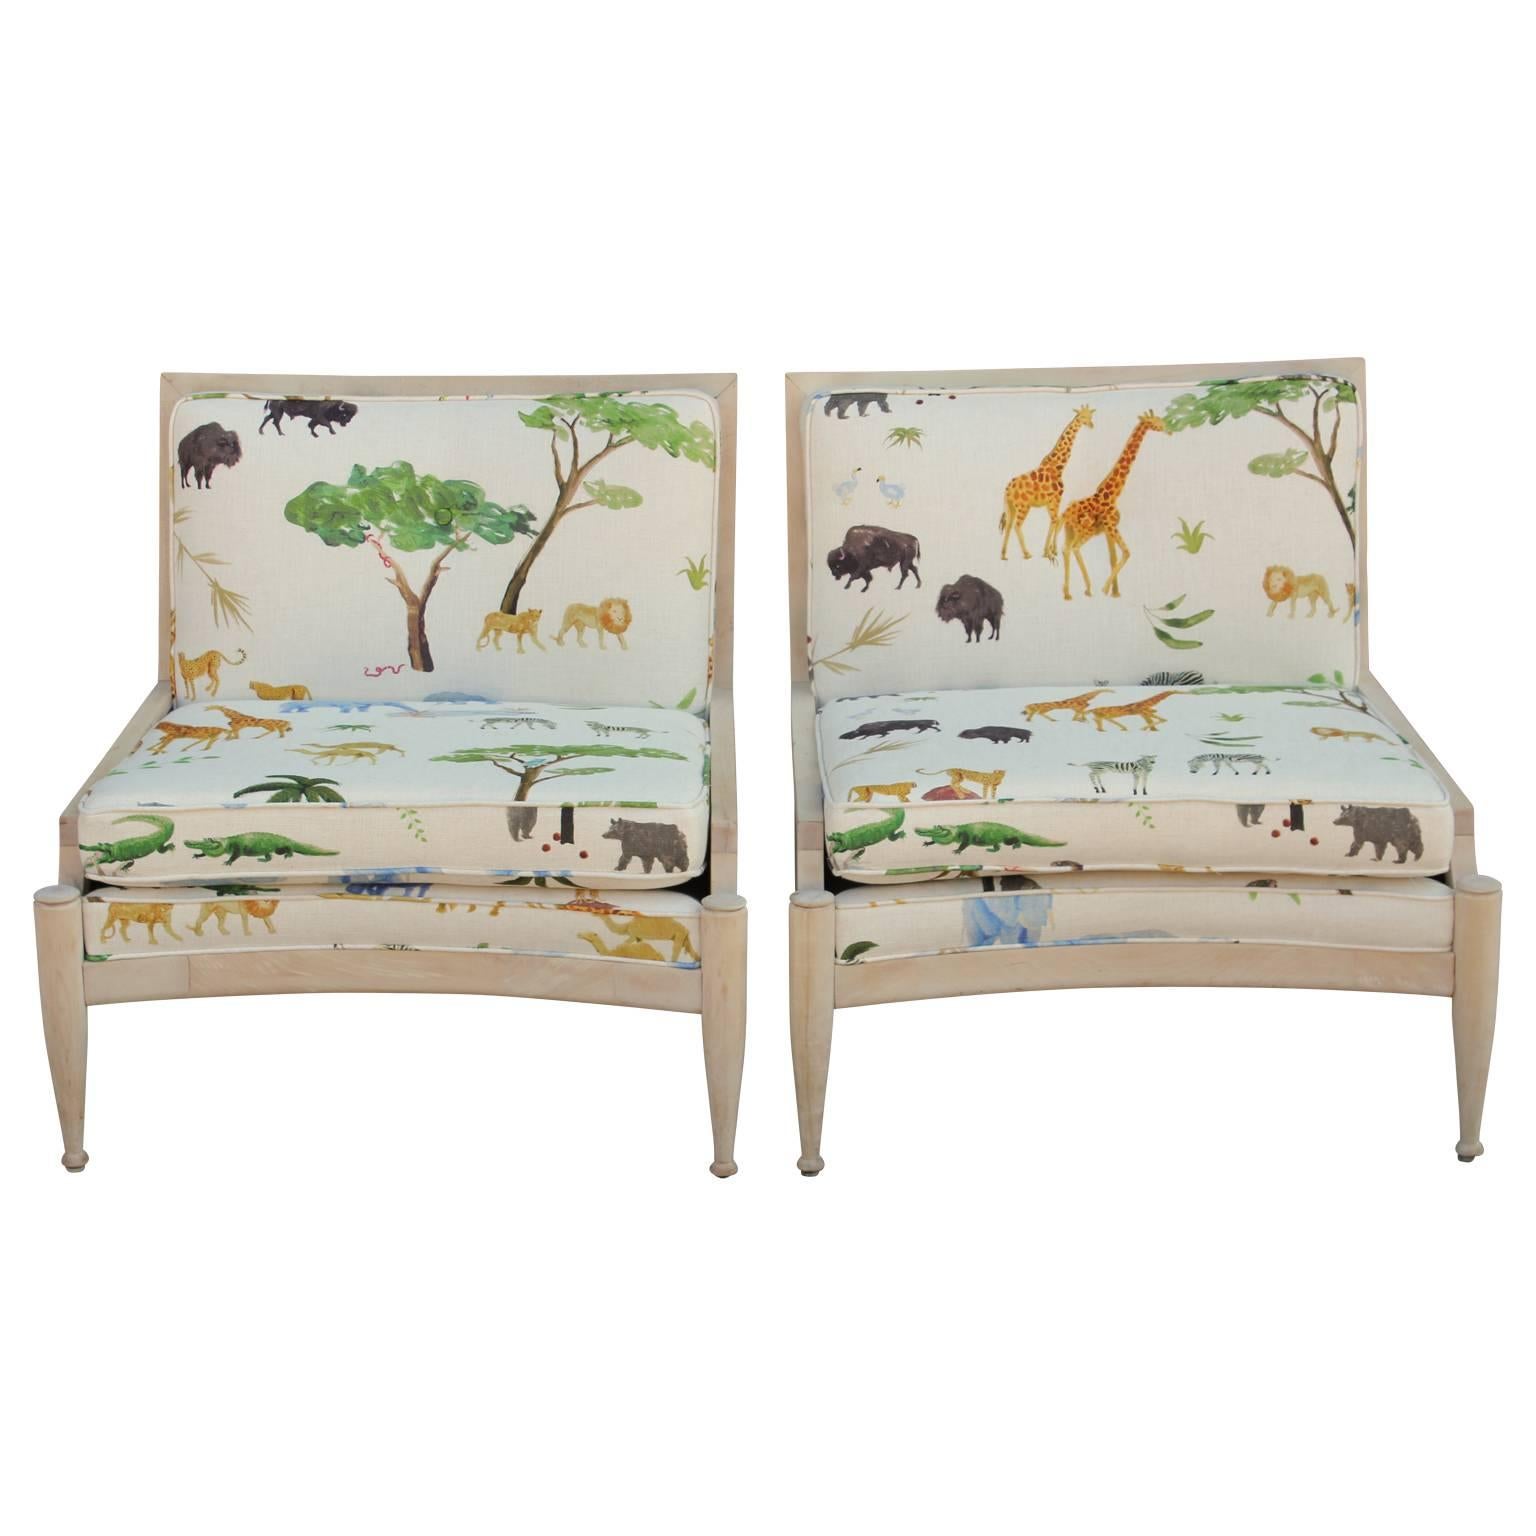 Pair of Modern Bleached Wood Cane Lounge Chairs in Colorful Jungle Animal Print